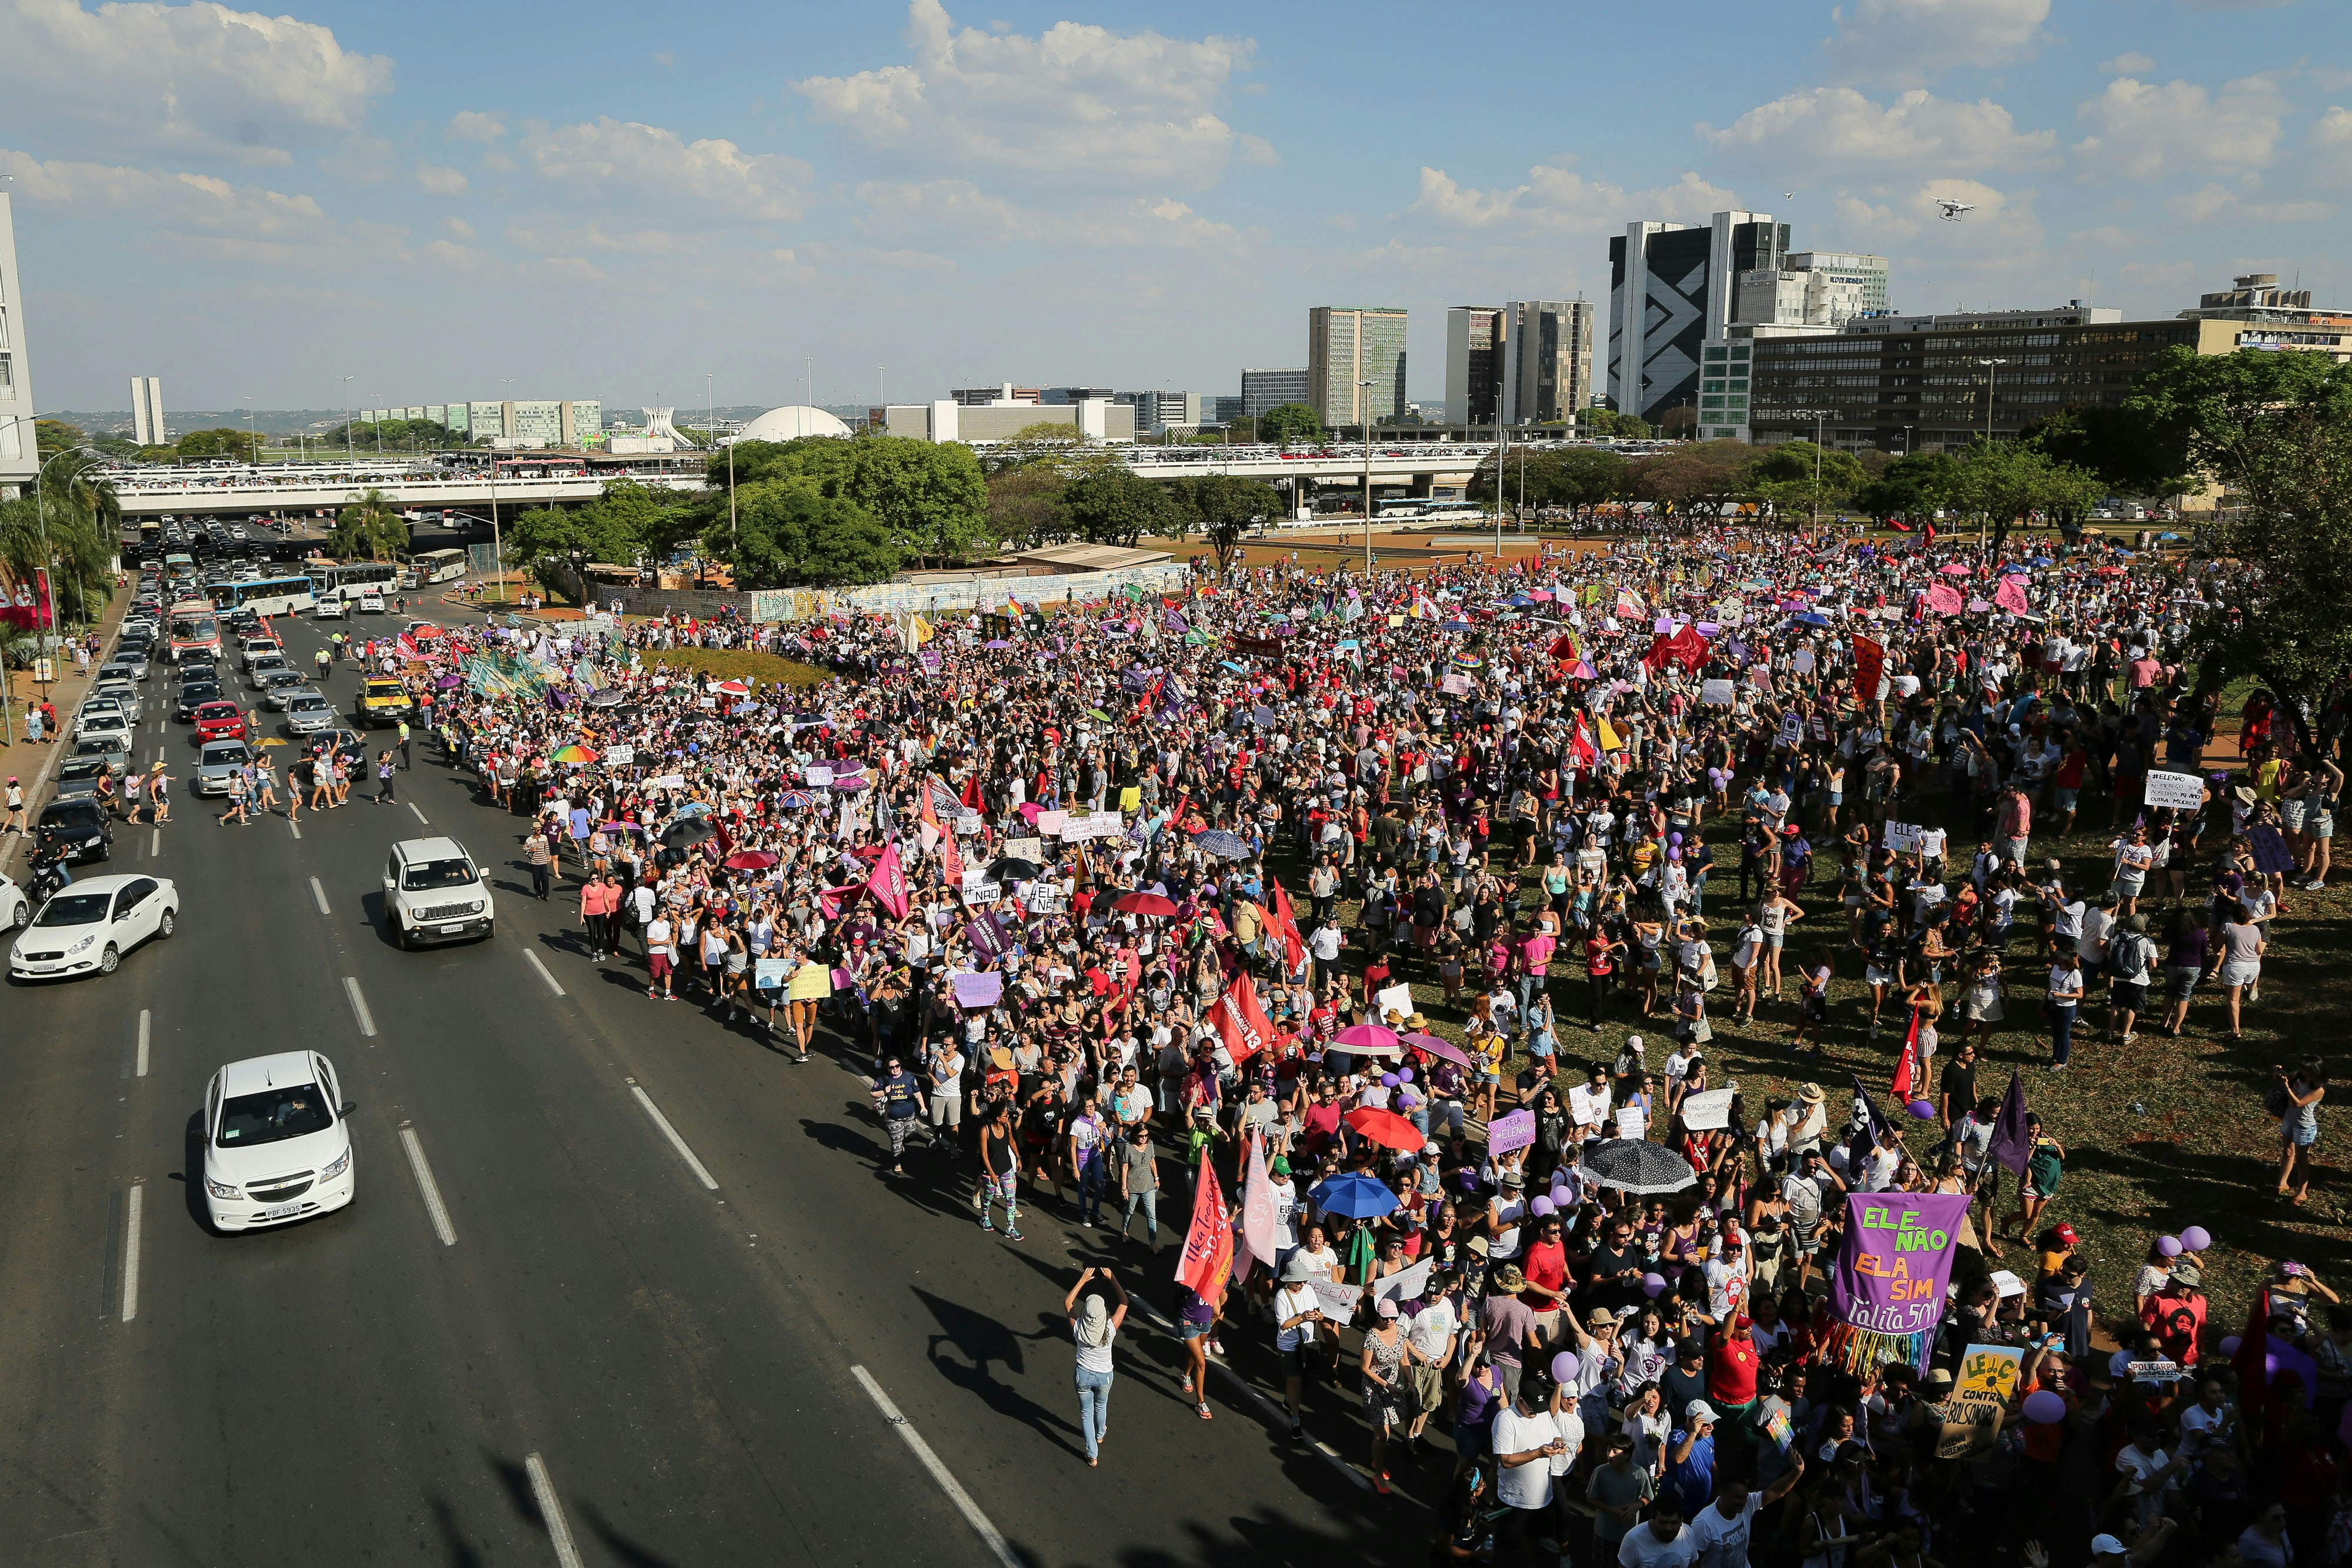 Demonstrators take part in a protest against Brazilian right-wing presidential candidate Jair Bolsonaro, called by a social media campaign under the hashtag #EleNao (Not Him), in Brasilia on September 29, 2018. - Women across Brazil launched a wave of nationwide protests on Saturday against the candidacy of the right-wing frontrunner in next week's presidential elections, Jair Bolsonaro who has been branded racist, misogynist and homophobic. (Photo by Sergio LIMA / AFP)